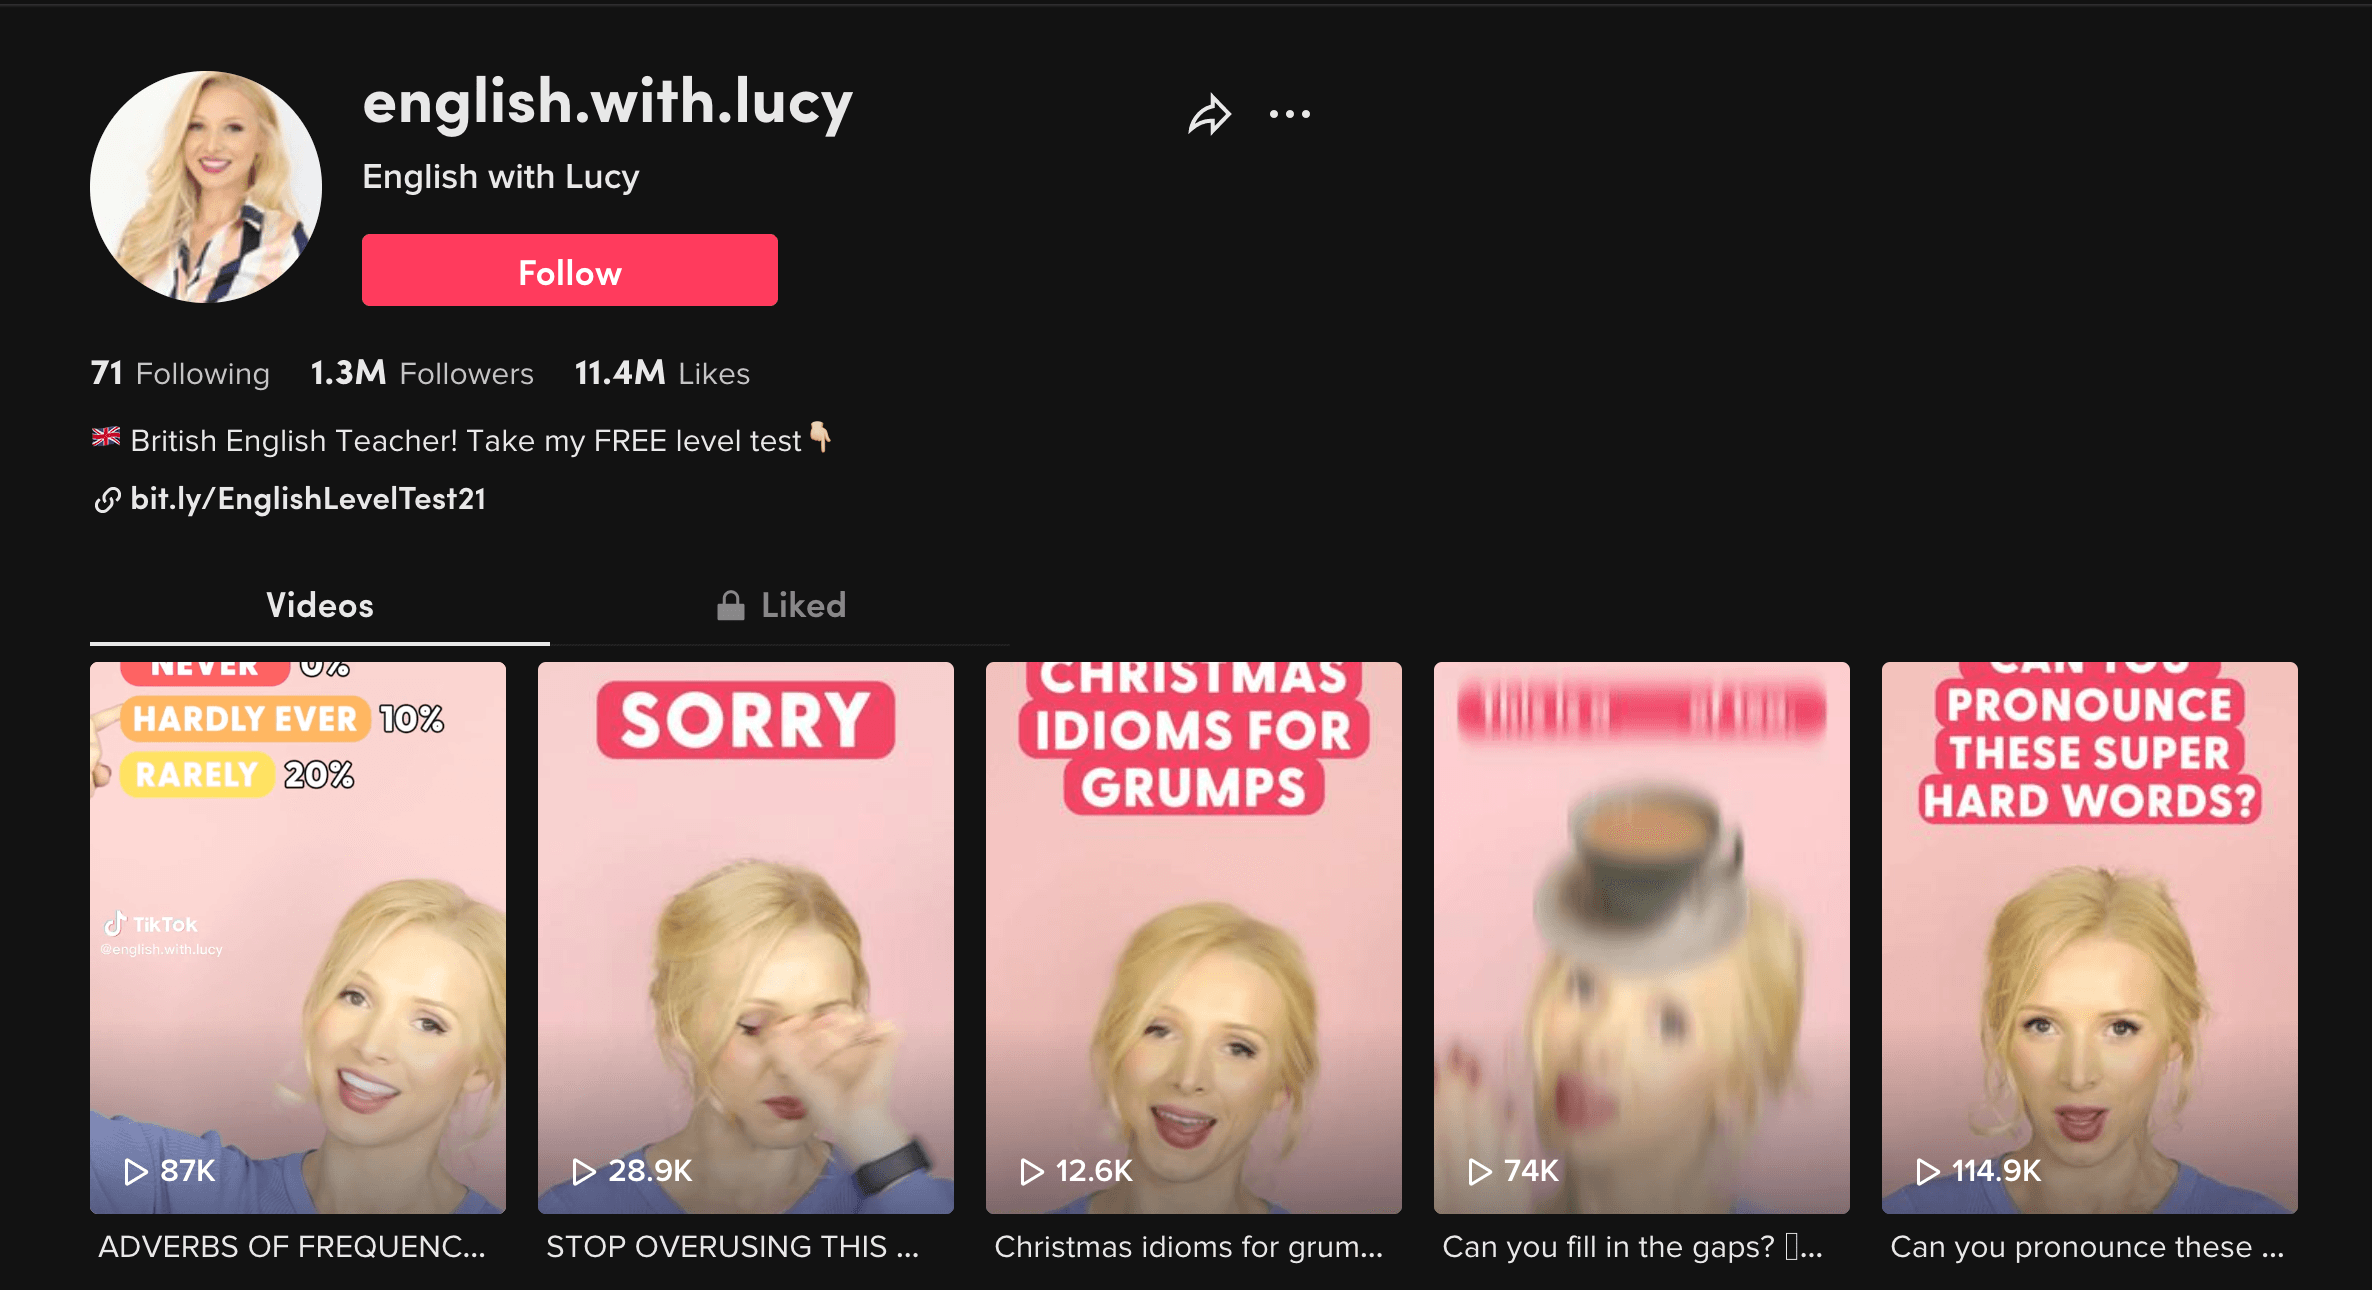 english.with.lucy - TikTok Account To Learn English